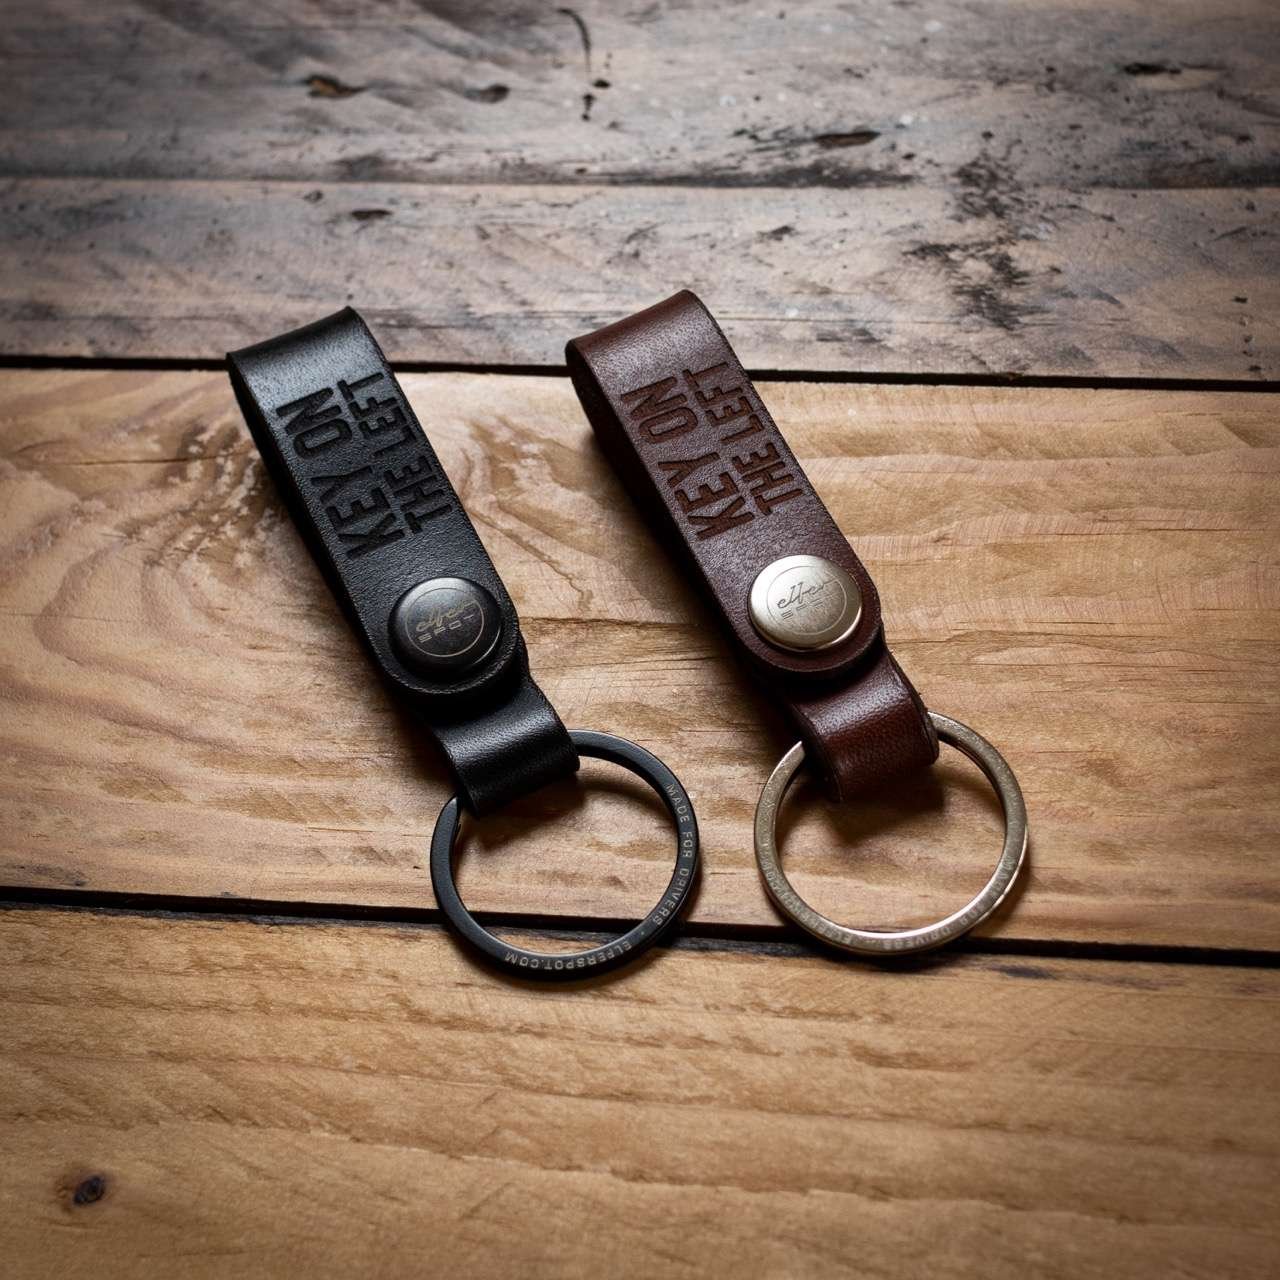 Loop Key Ring Key on the left - Driver's Collection - Elferspot Shop